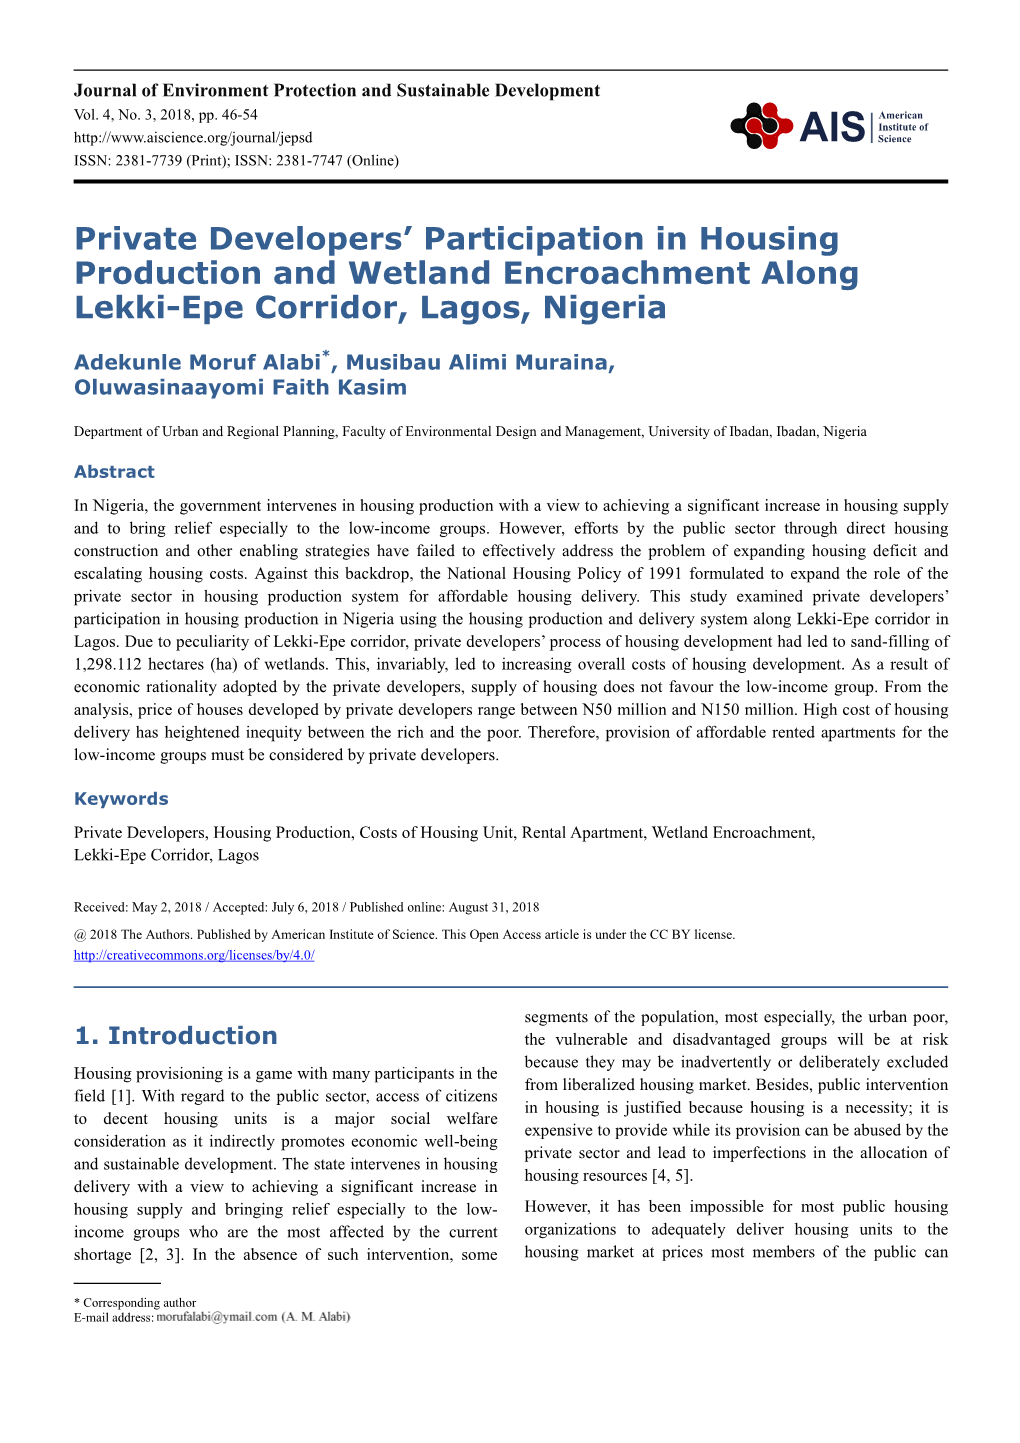 Private Developers' Participation in Housing Production and Wetland